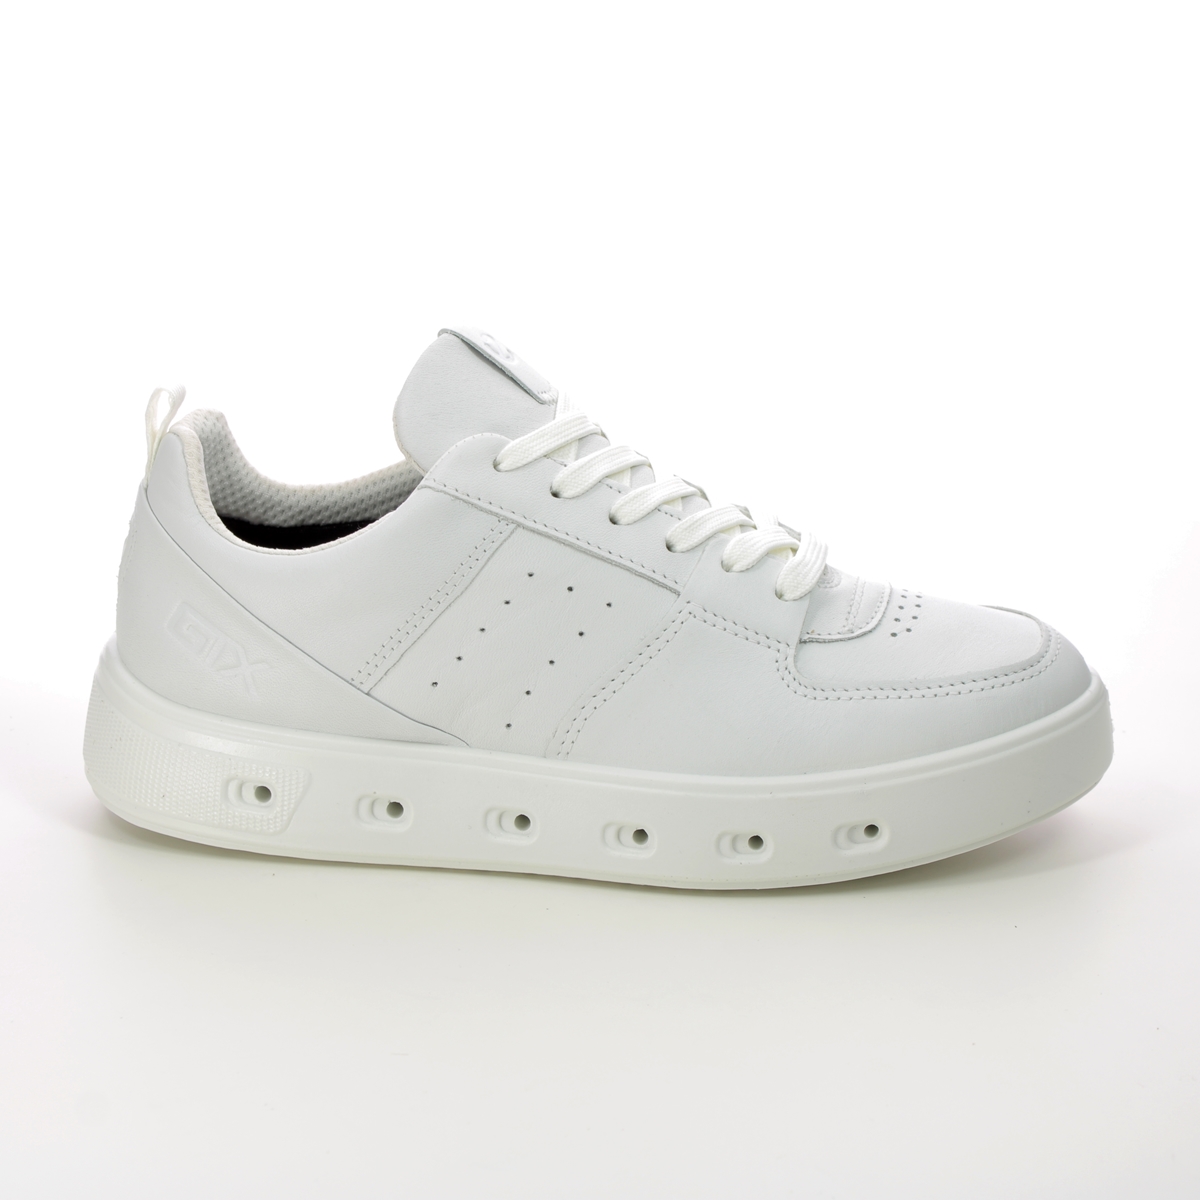 ECCO Street 720 Gtx WHITE LEATHER Womens trainers 209713-01007